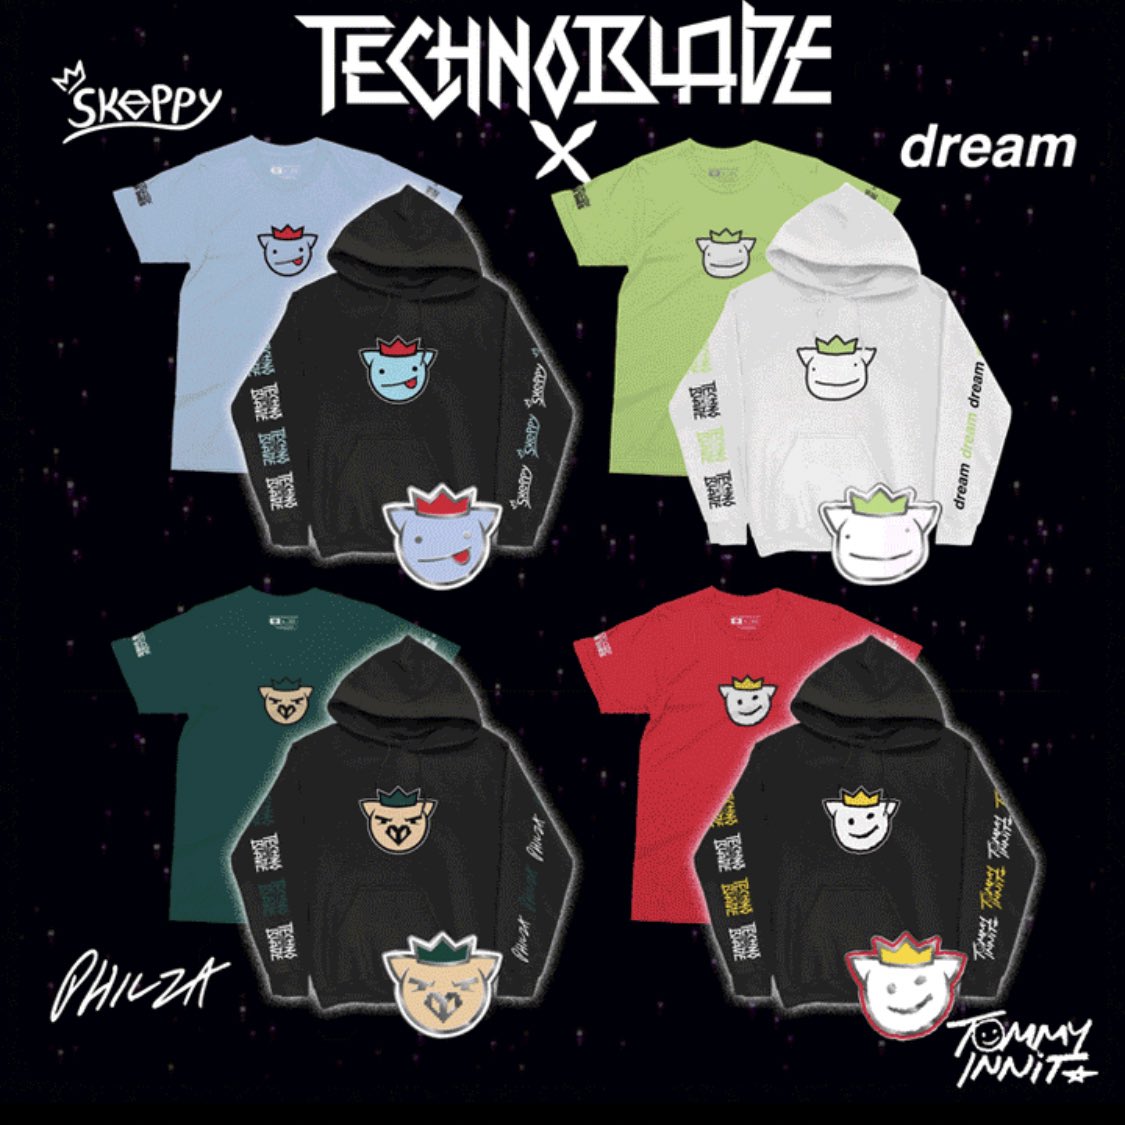 Technoblade's merch release after death has fans chuckling through